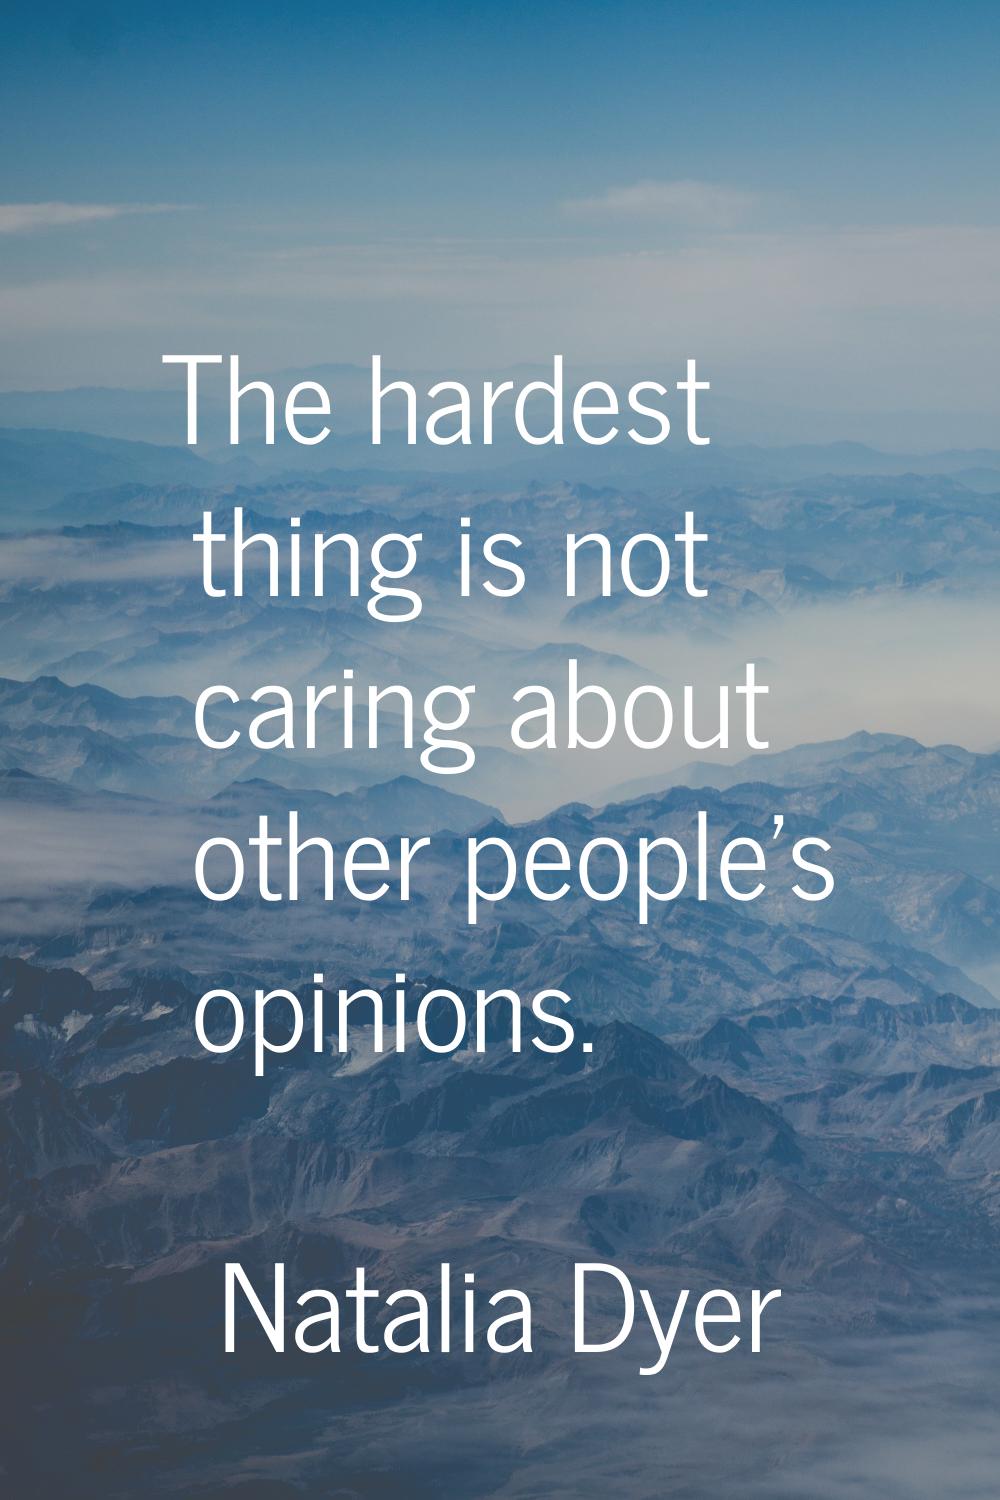 The hardest thing is not caring about other people's opinions.